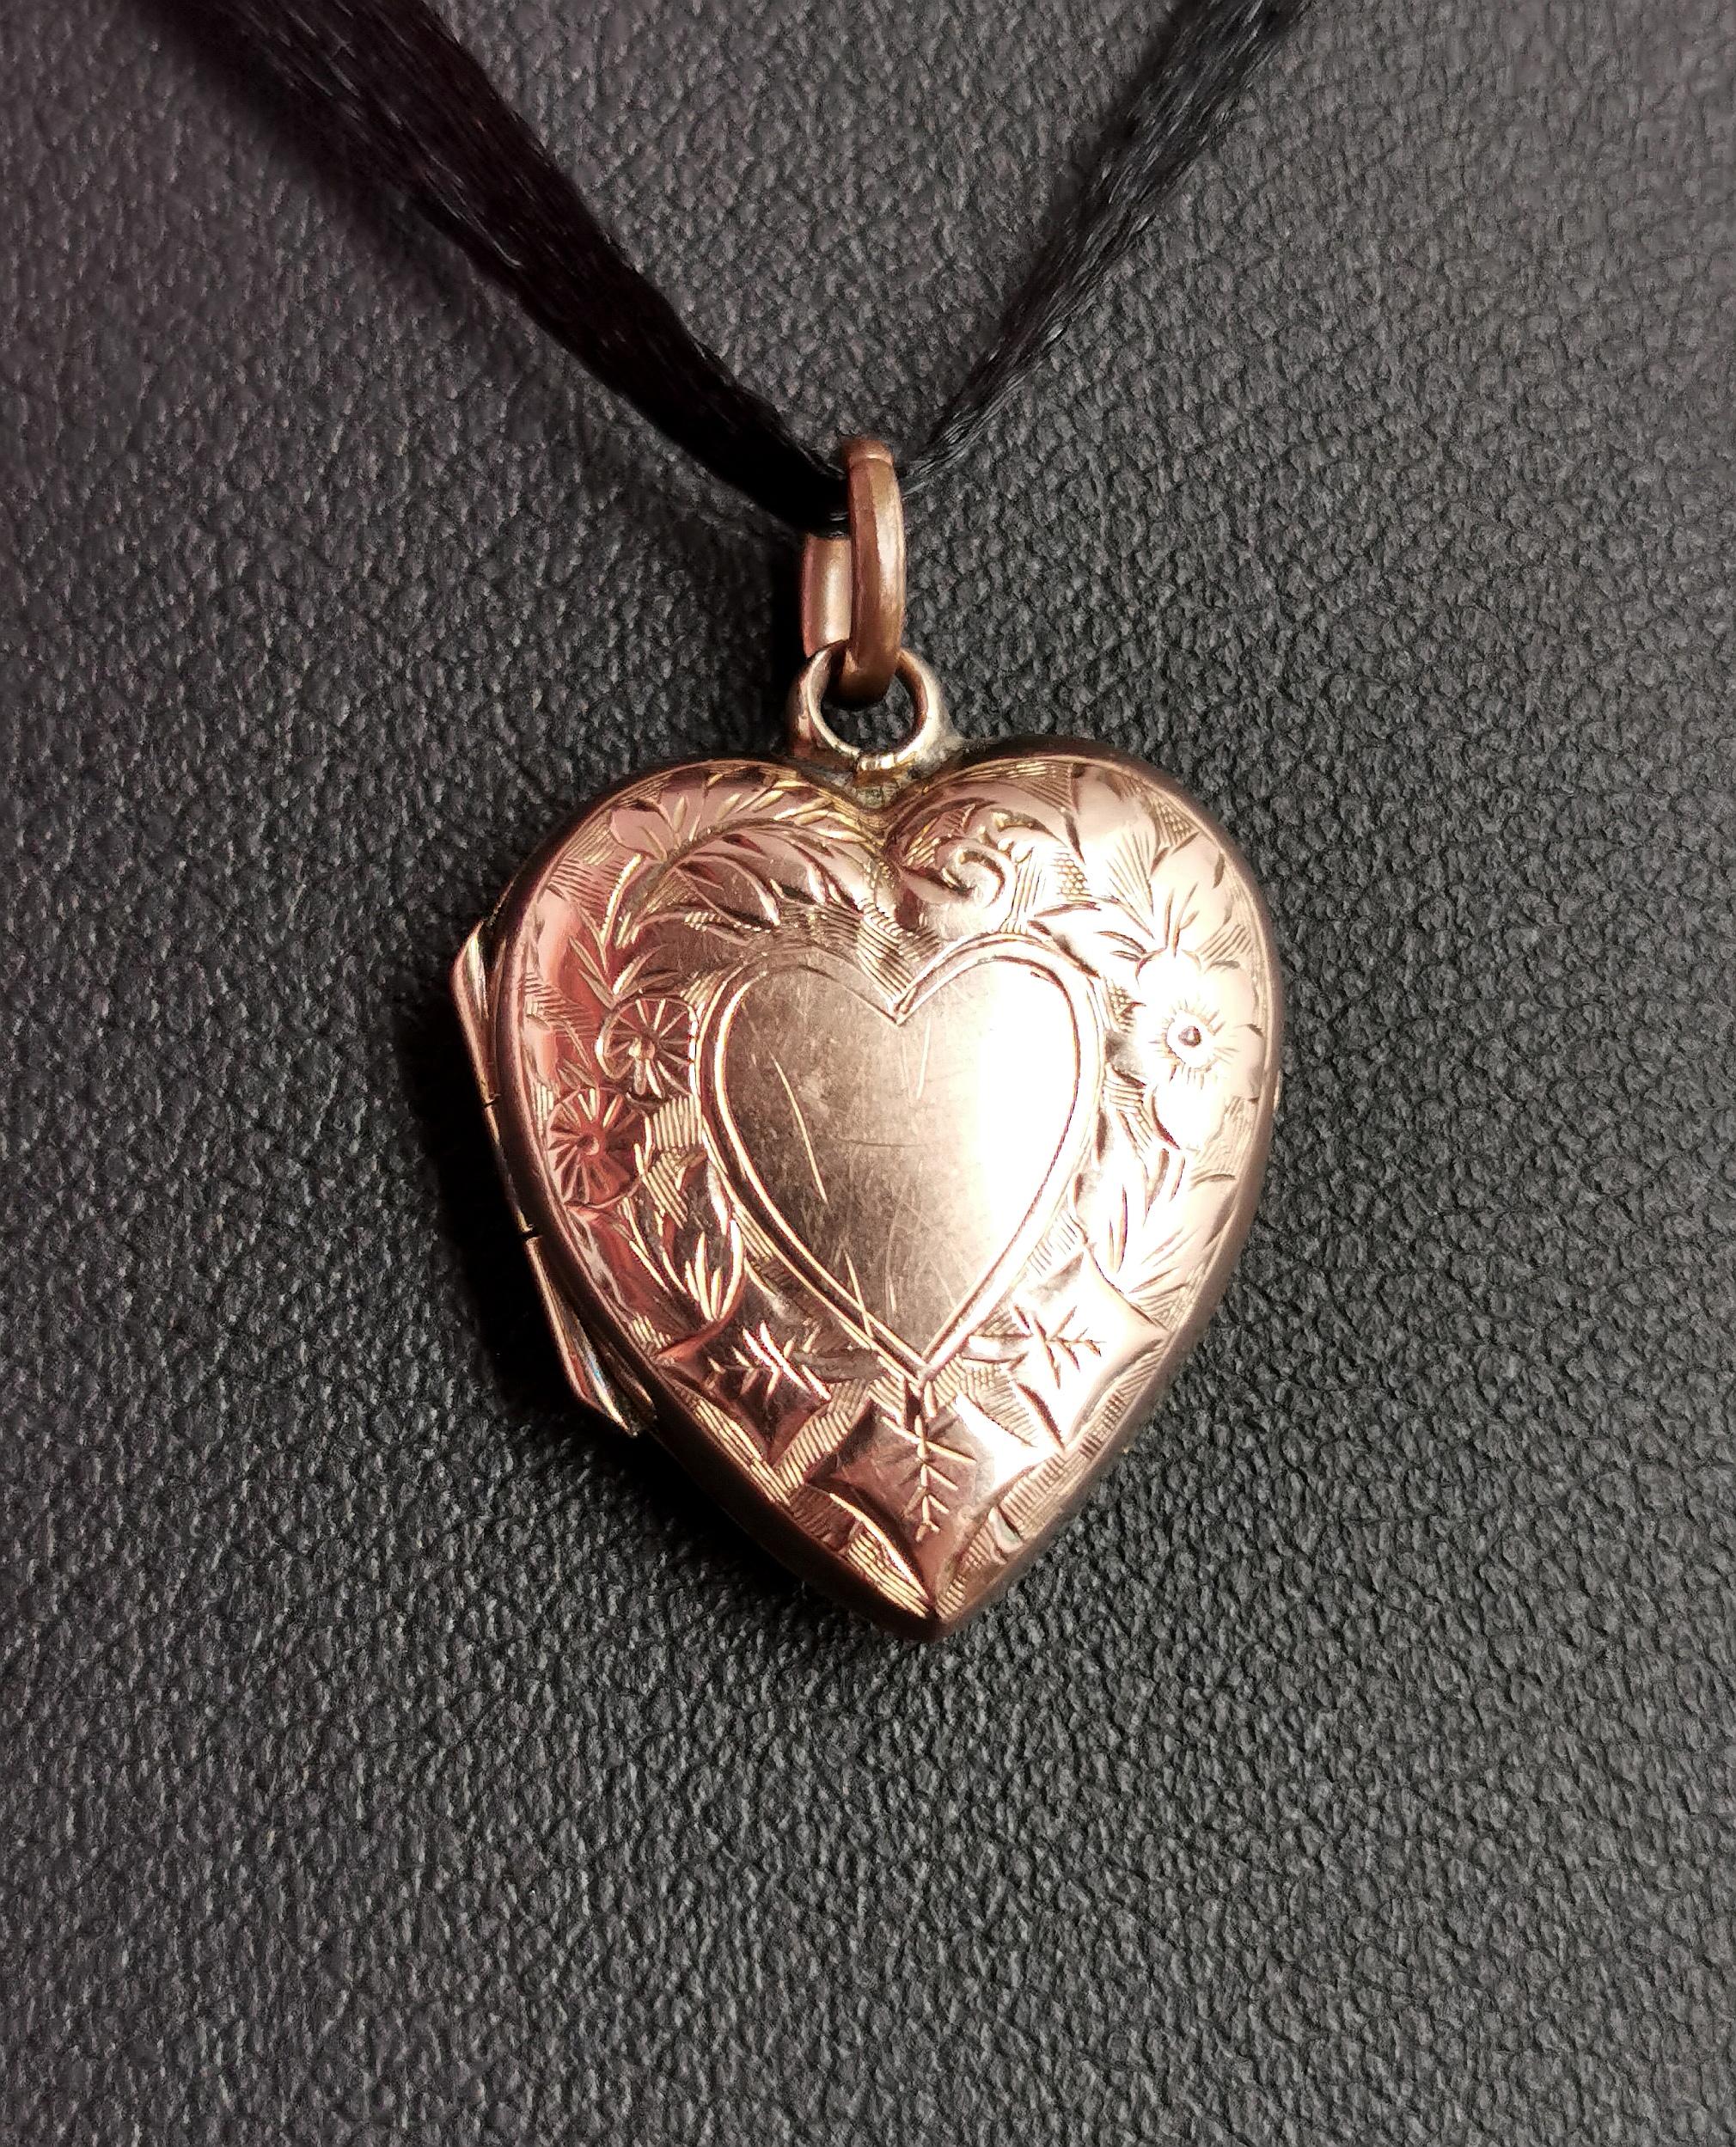 A sweet little antique 9kt gold heart shaped locket pendant.

Edwardian era it has an elaborately engraved front with ivy leaves and flowers, there is a plain polished heart in the centre which has not been engraved so could be personalised if